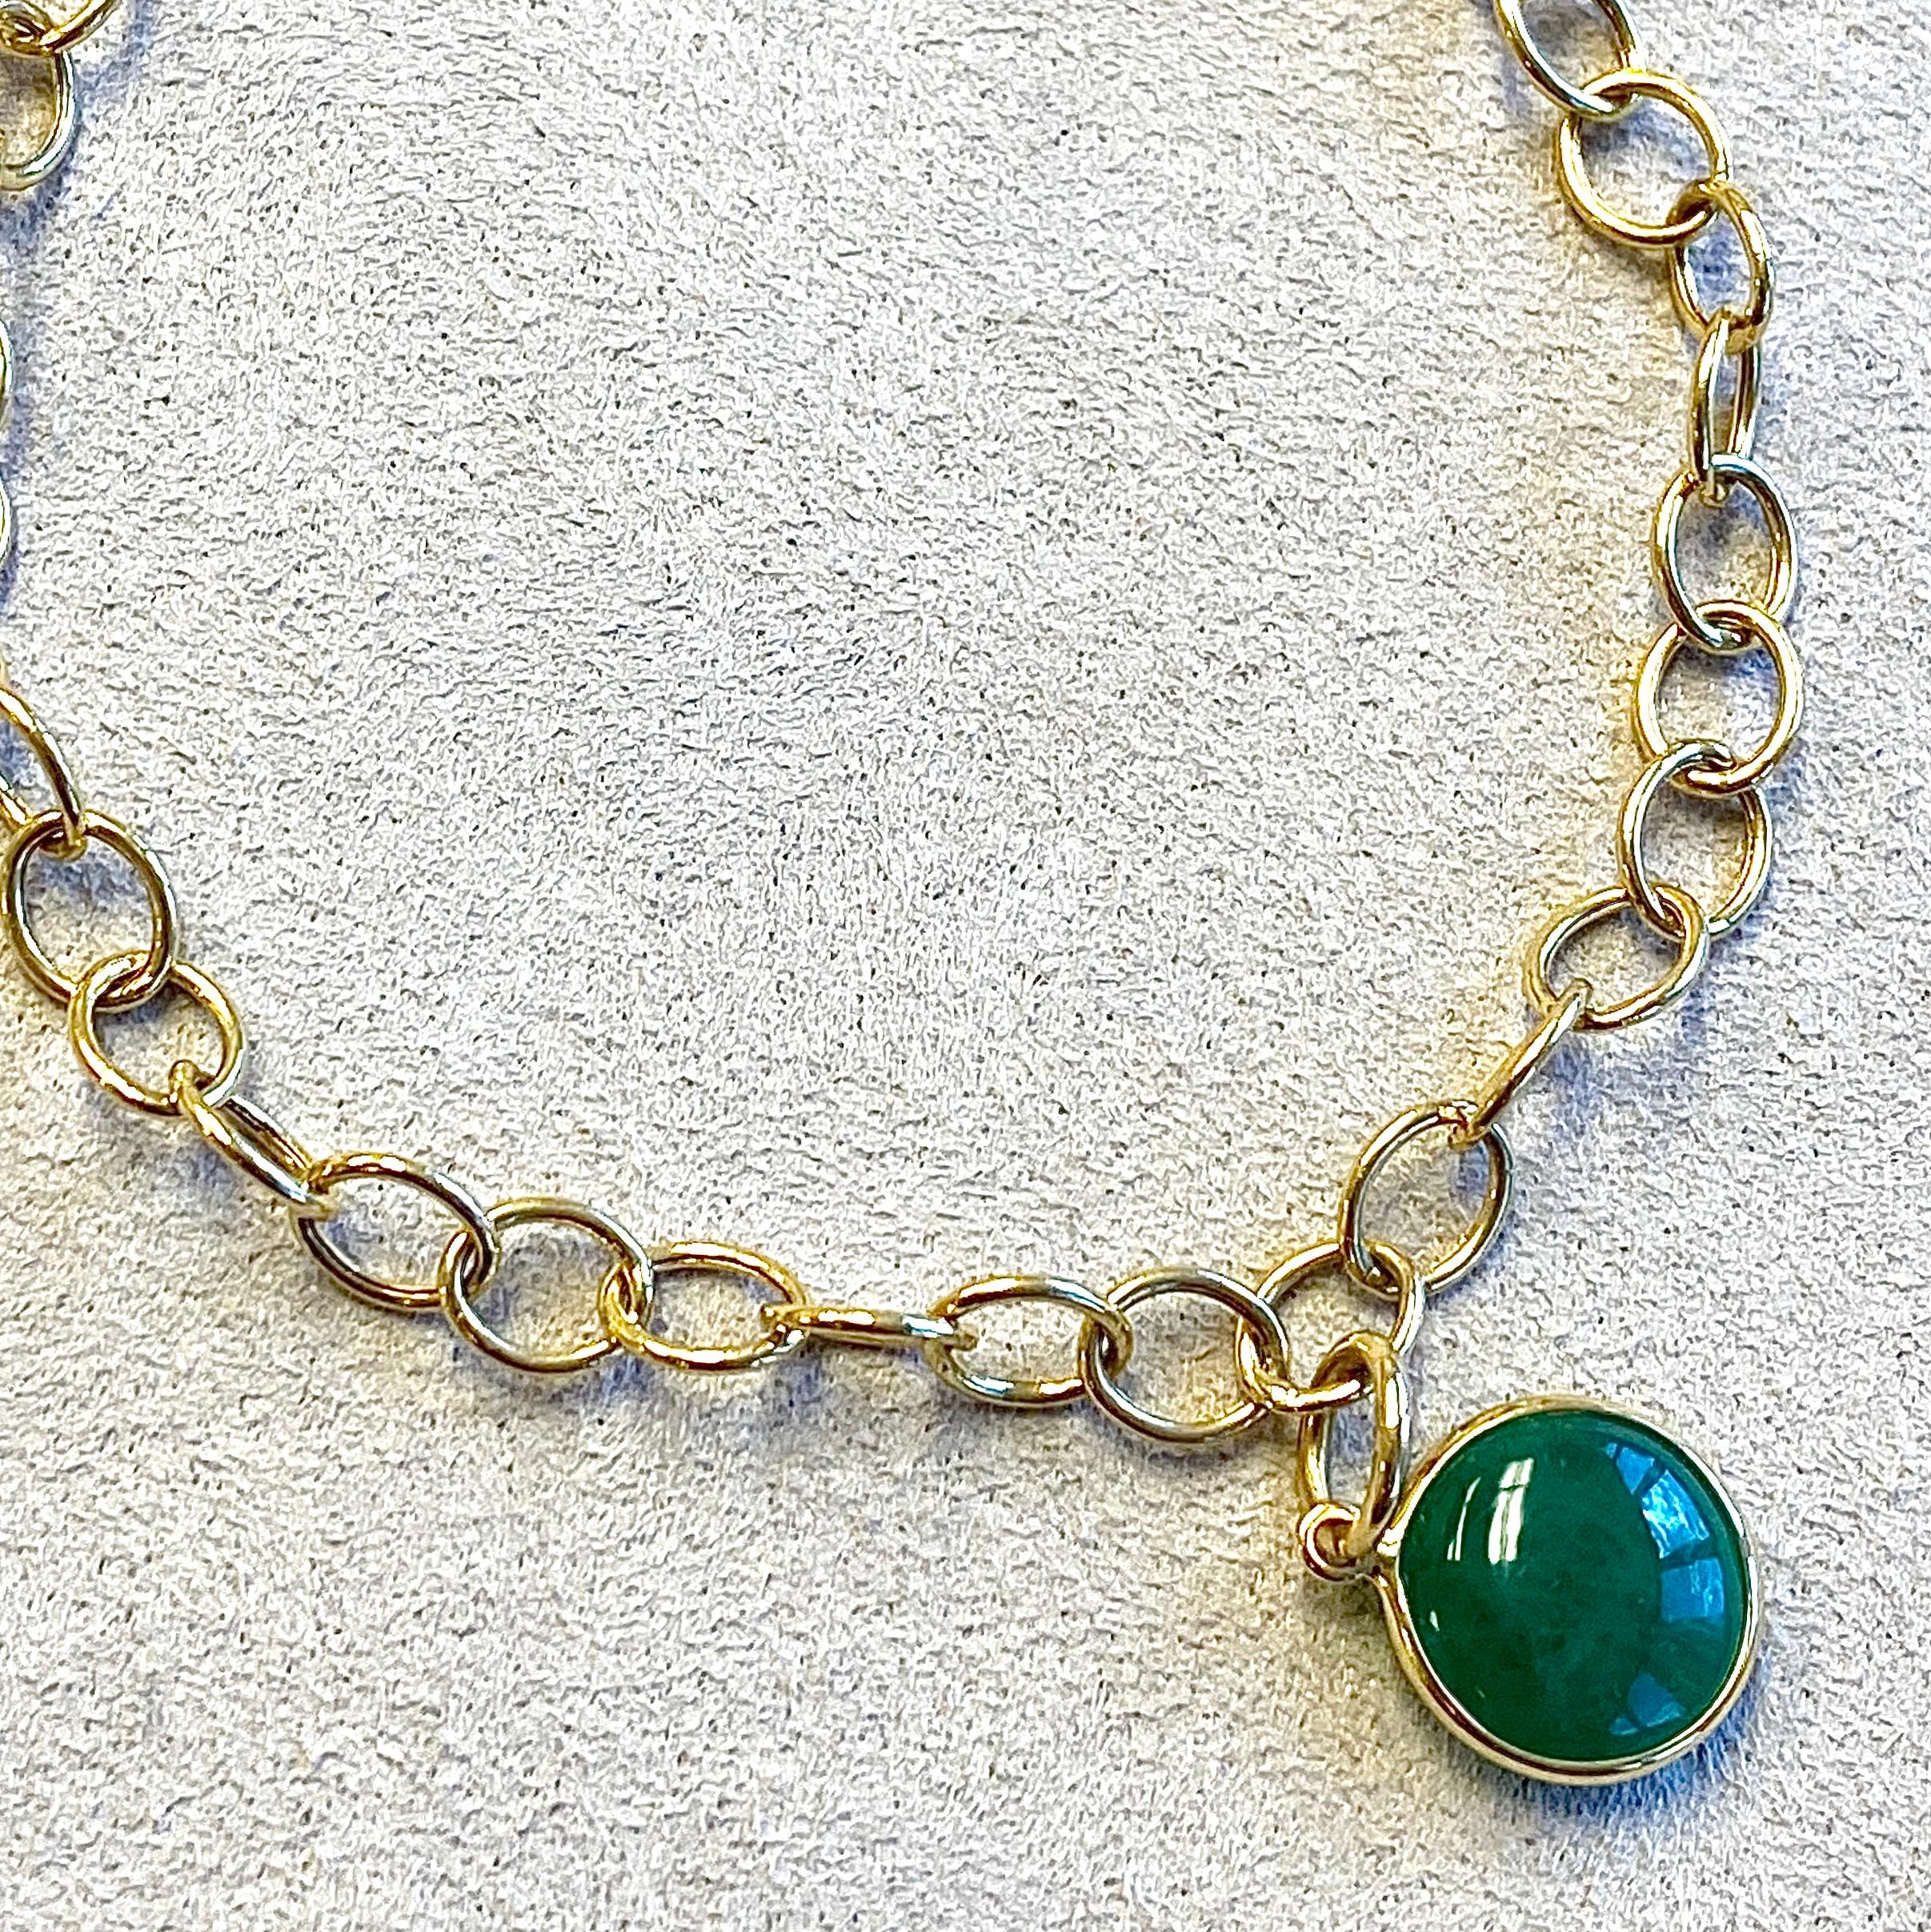 Created in 18 karat yellow gold
Emerald 3.5 cts approx 
7.25 inch length with lobster clasp


About the Designers

Drawing inspiration from little things, Dharmesh & Namrata Kothari have created an extraordinary and refreshing collection of